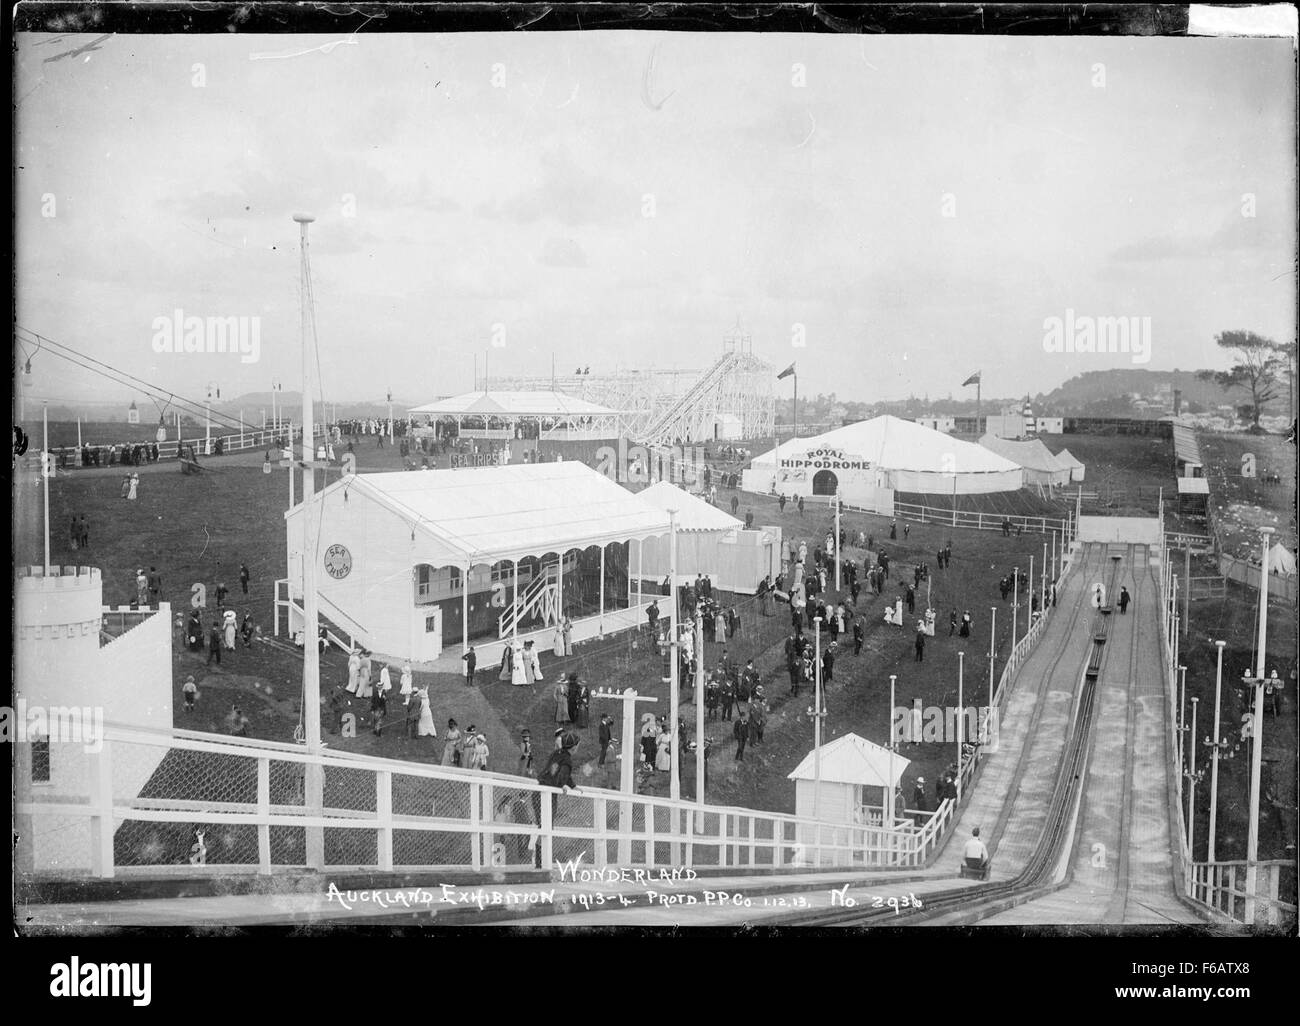 View of Wonderland showing the Royal Hippodrome and Roller Coaster ...